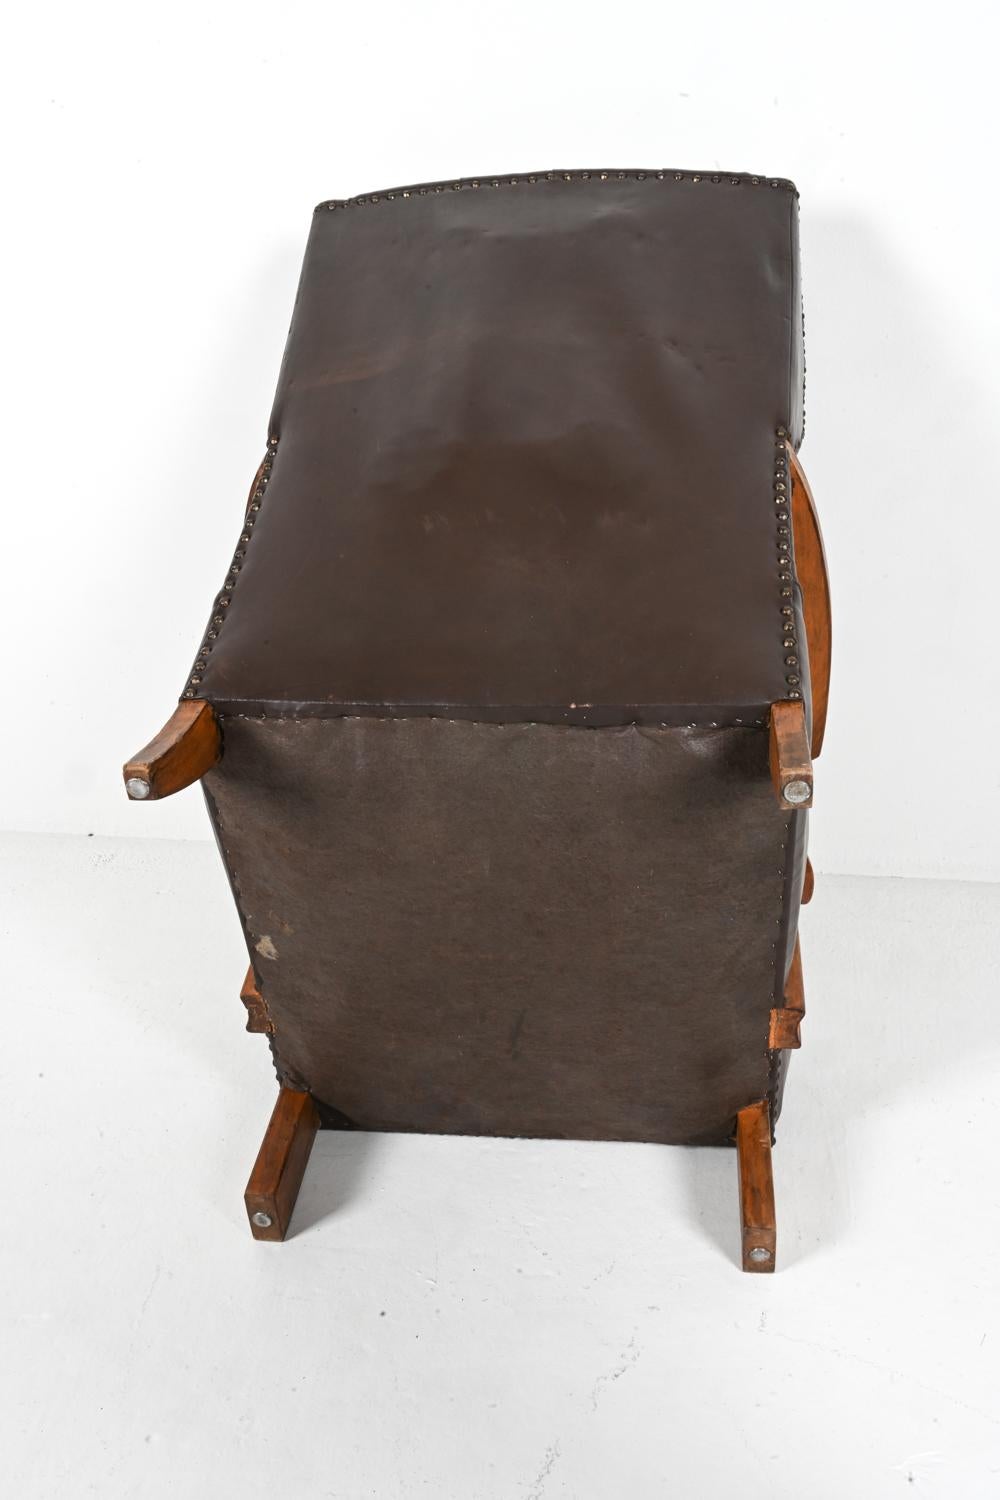 Fritz Hansen Model 1582 Wingback Lounge Chair in Beech & Leather, c. 1940's For Sale 9